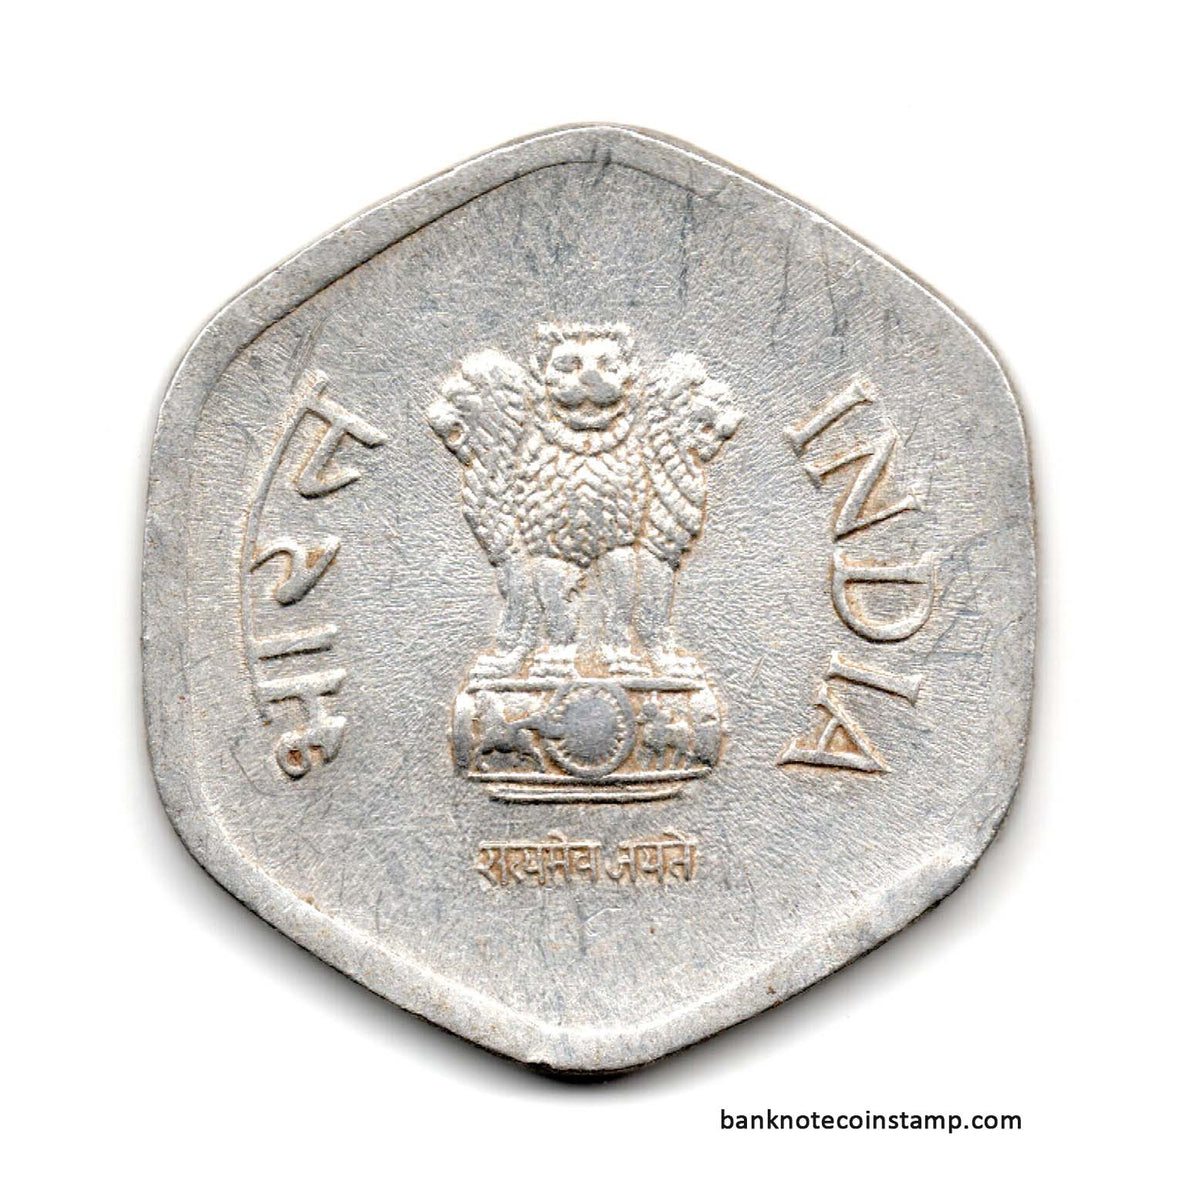 India 20 Paise 1985 Used Coin – Banknotecoinstamp